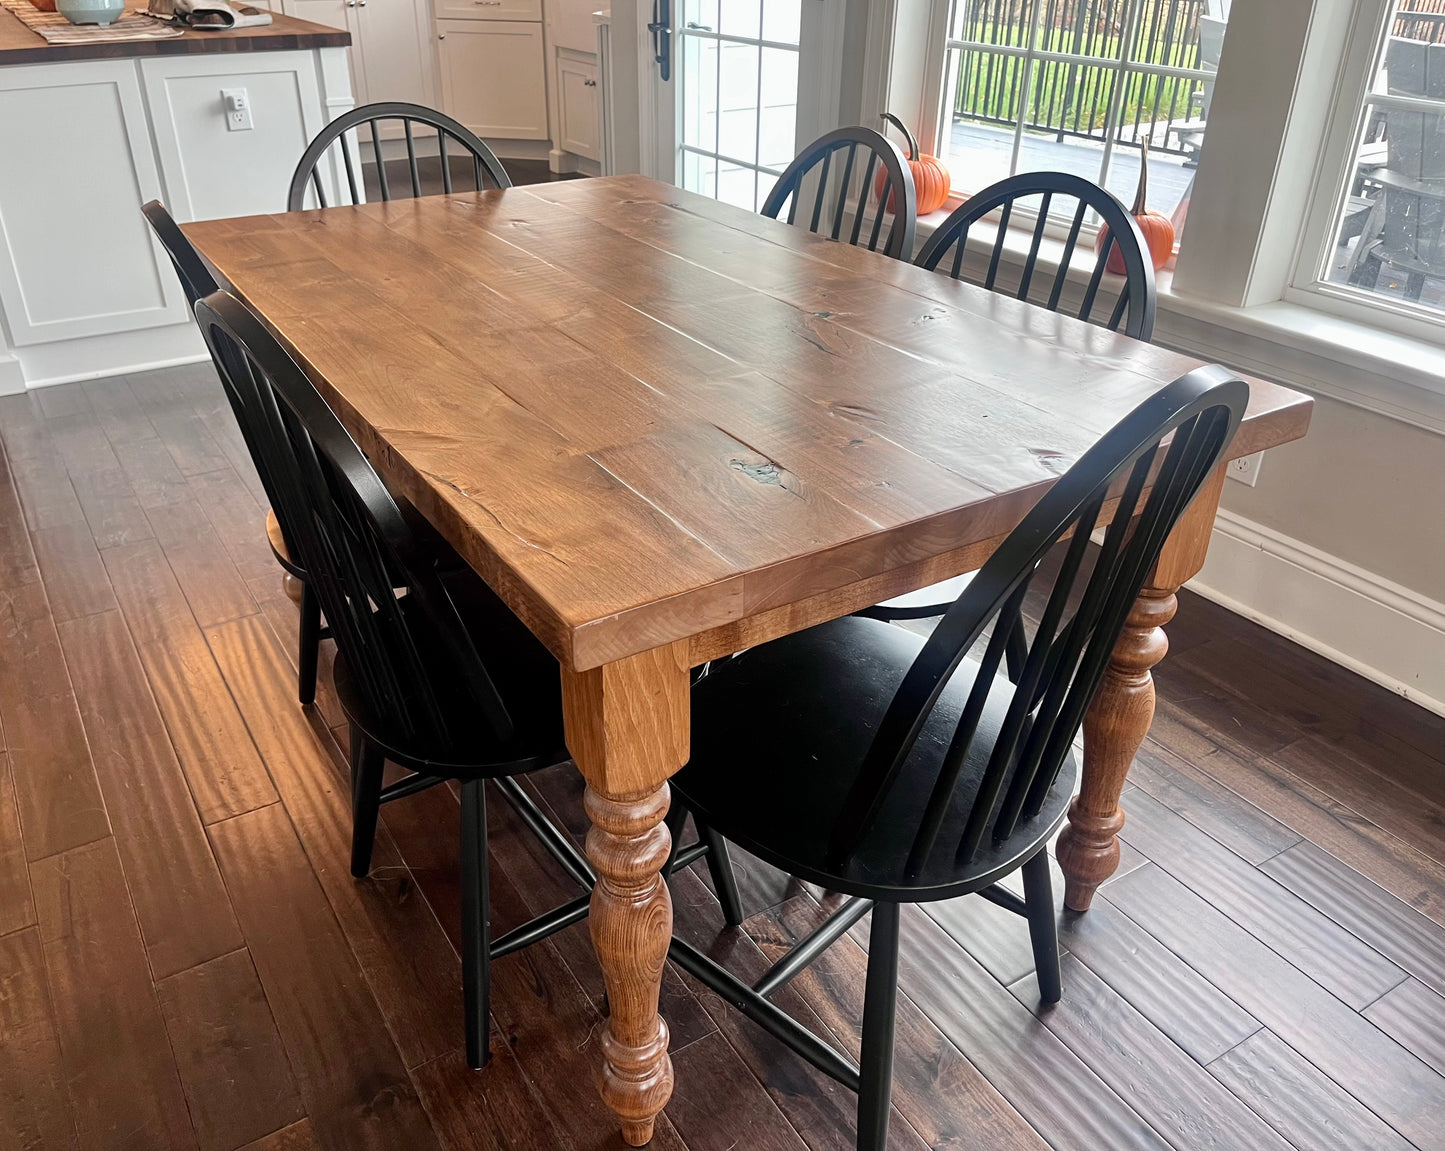 5' L x 36" W Rustic Dining Table with 6 Cottage Dining Chairs